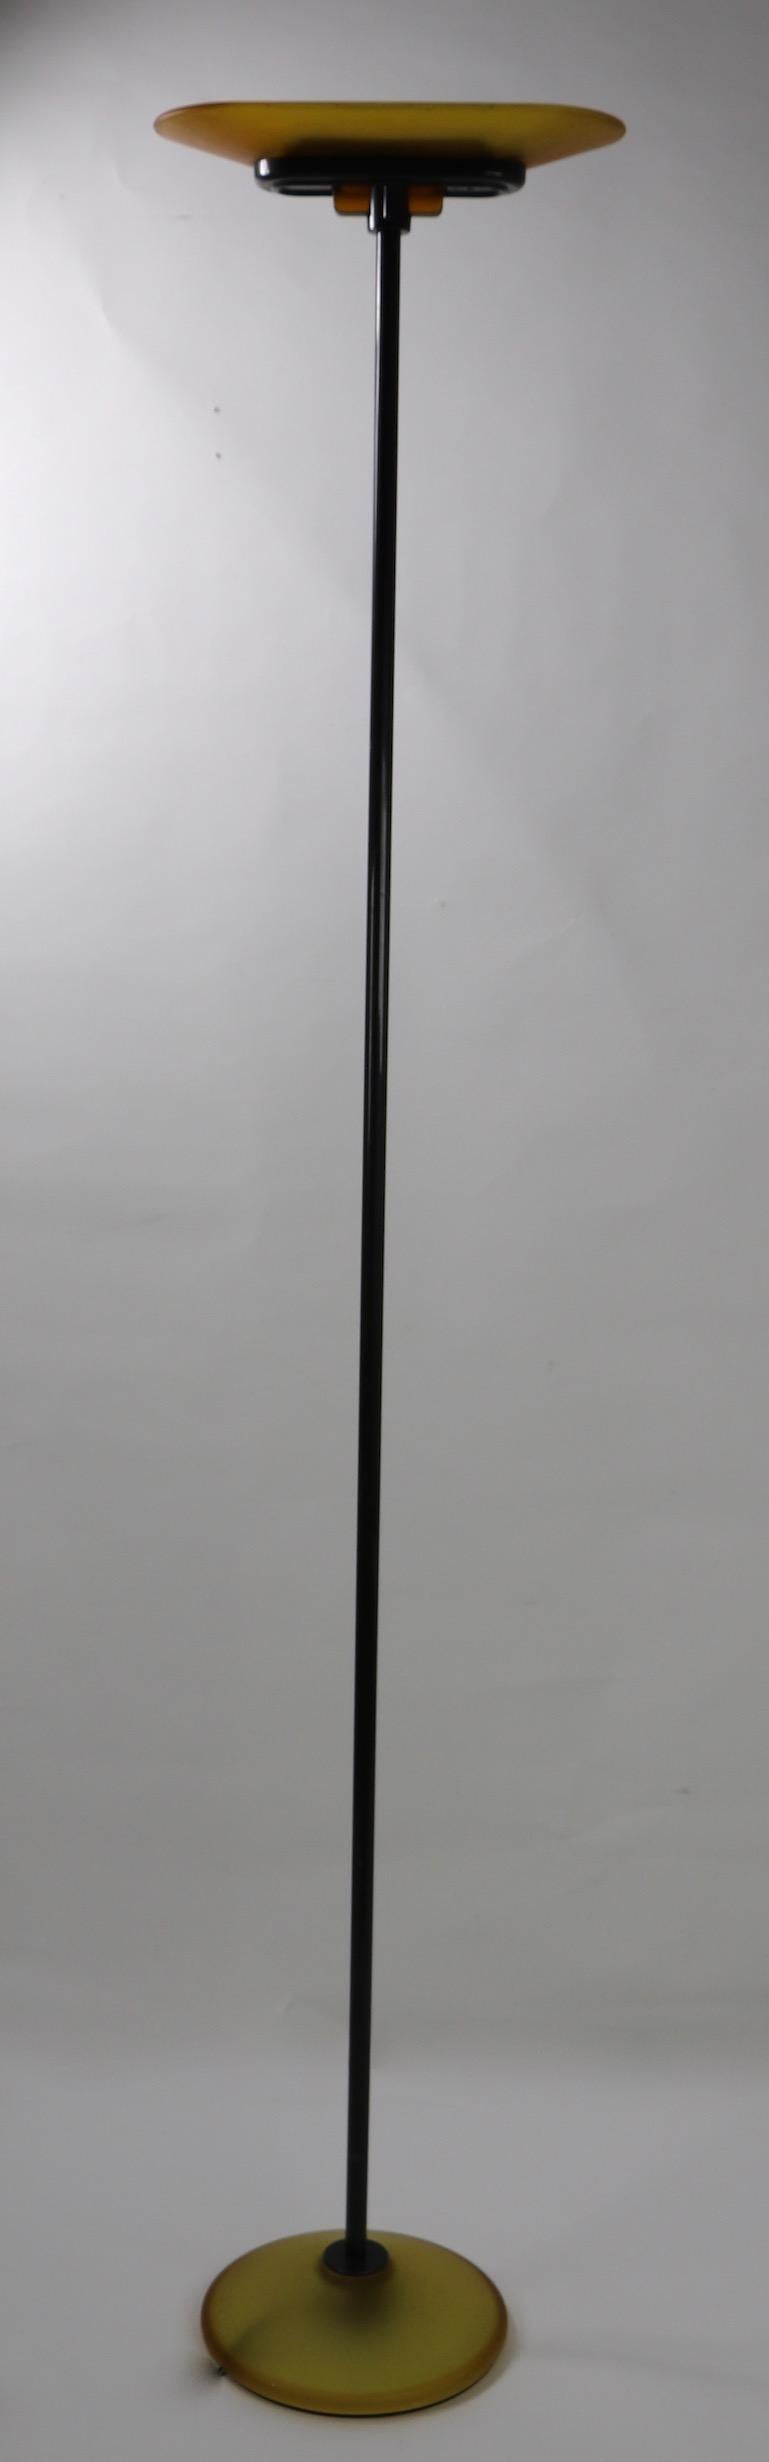 Nice example of the Classic Jill floor lamp designed by Santiago Miranda for Arteluce, circa 1980s halogen up light torchiere. This model has an amber glass shade, and base, with black metal vertical rod. It has an on line on off switch along with